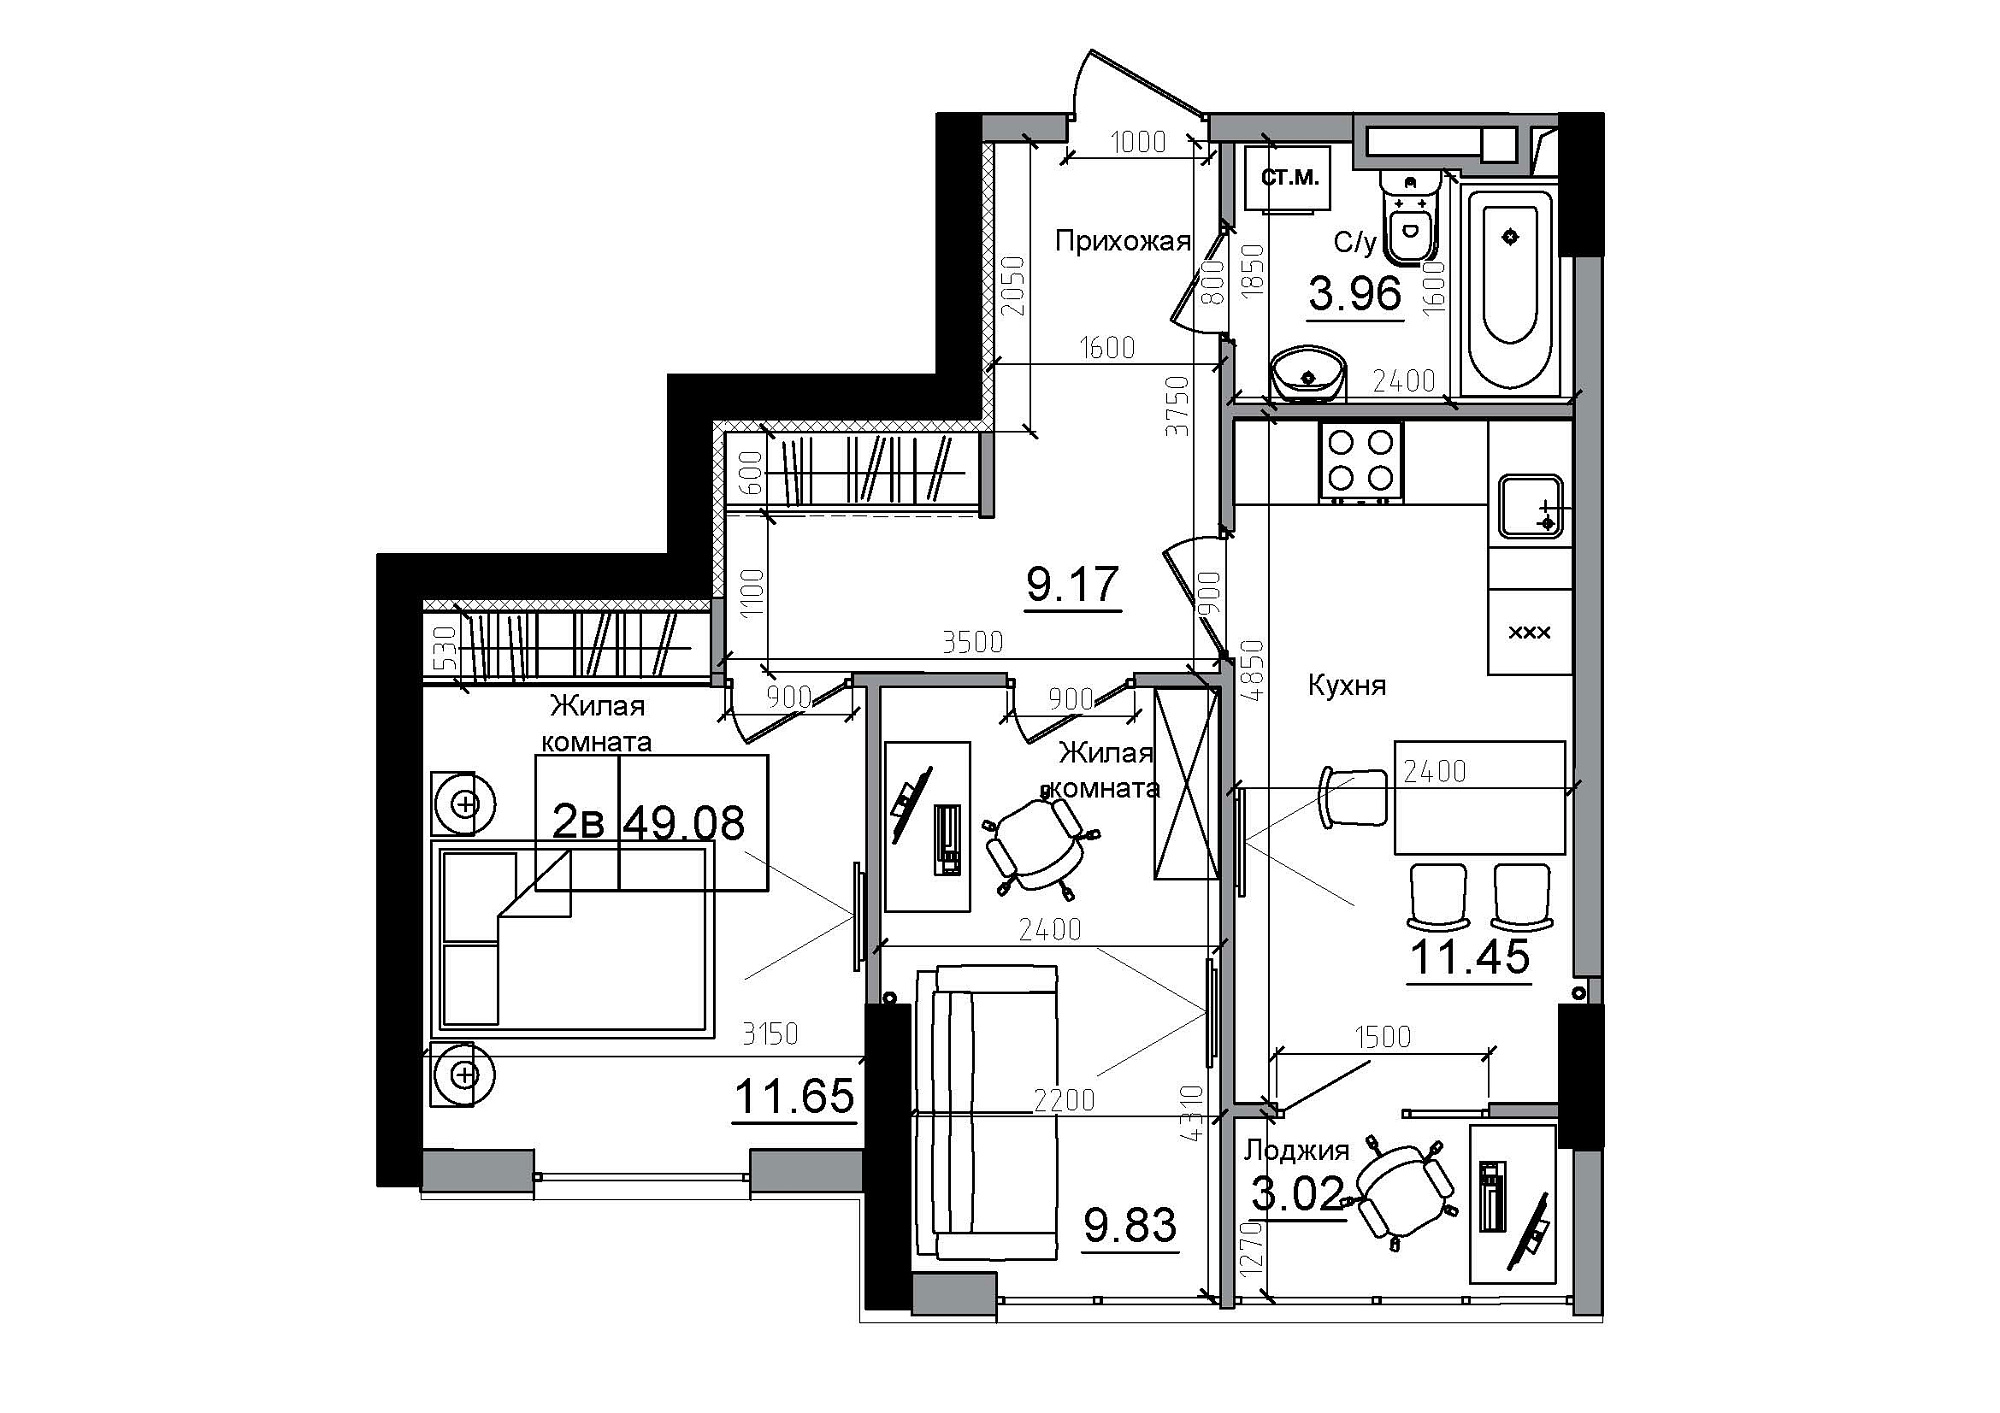 Planning 2-rm flats area 49.08m2, AB-12-05/00015.